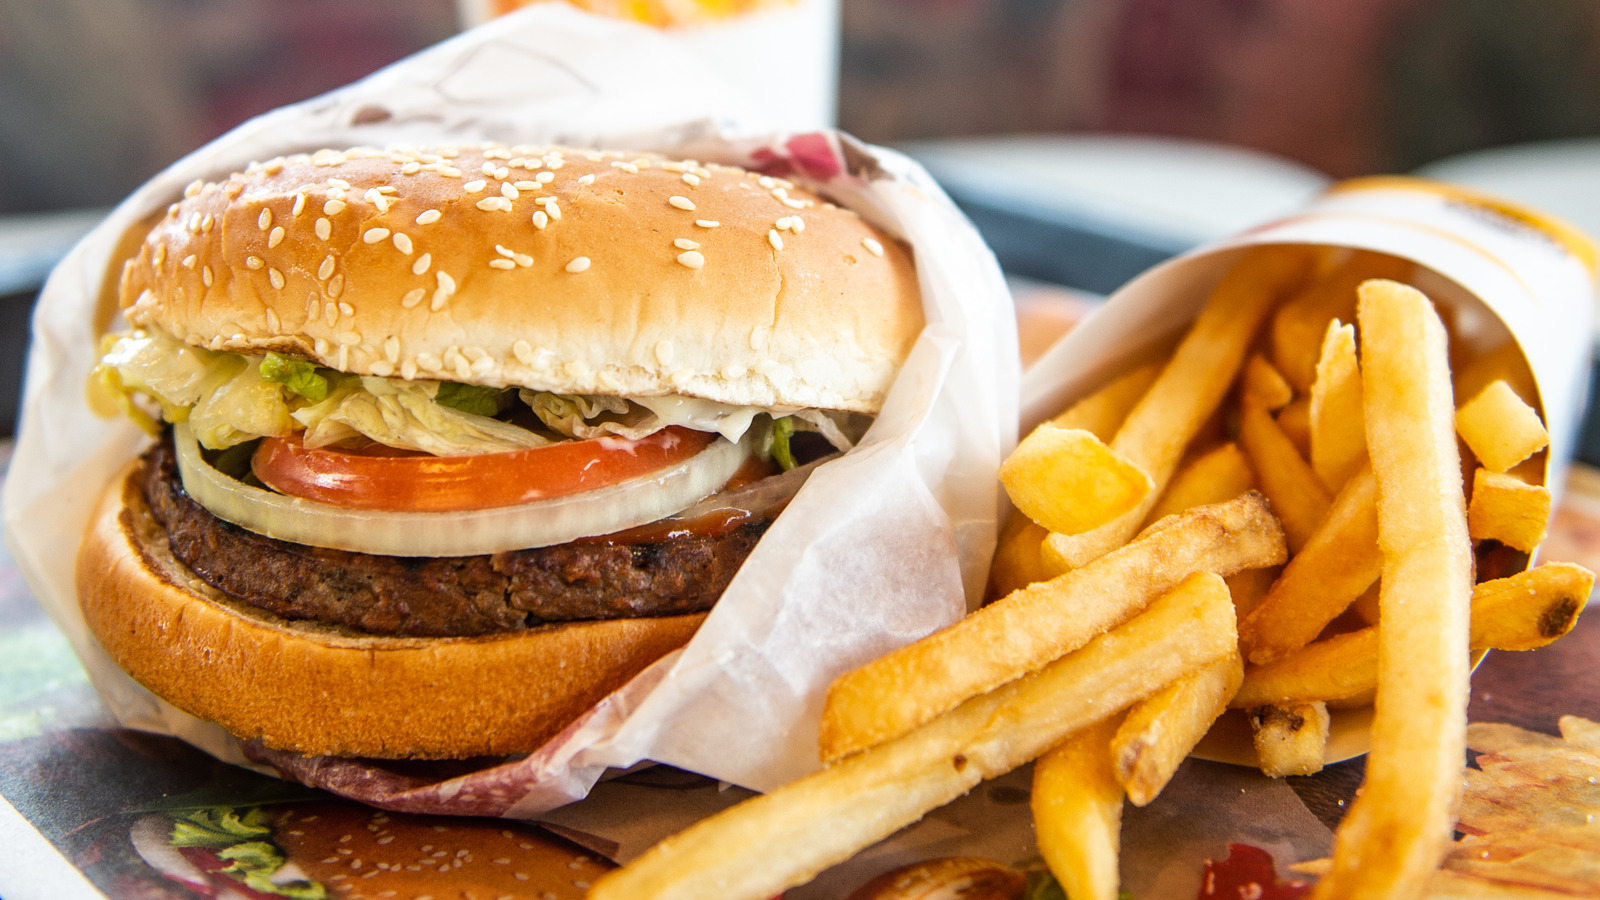 This New Burger King Impossible Burger Comes With Real Bacon